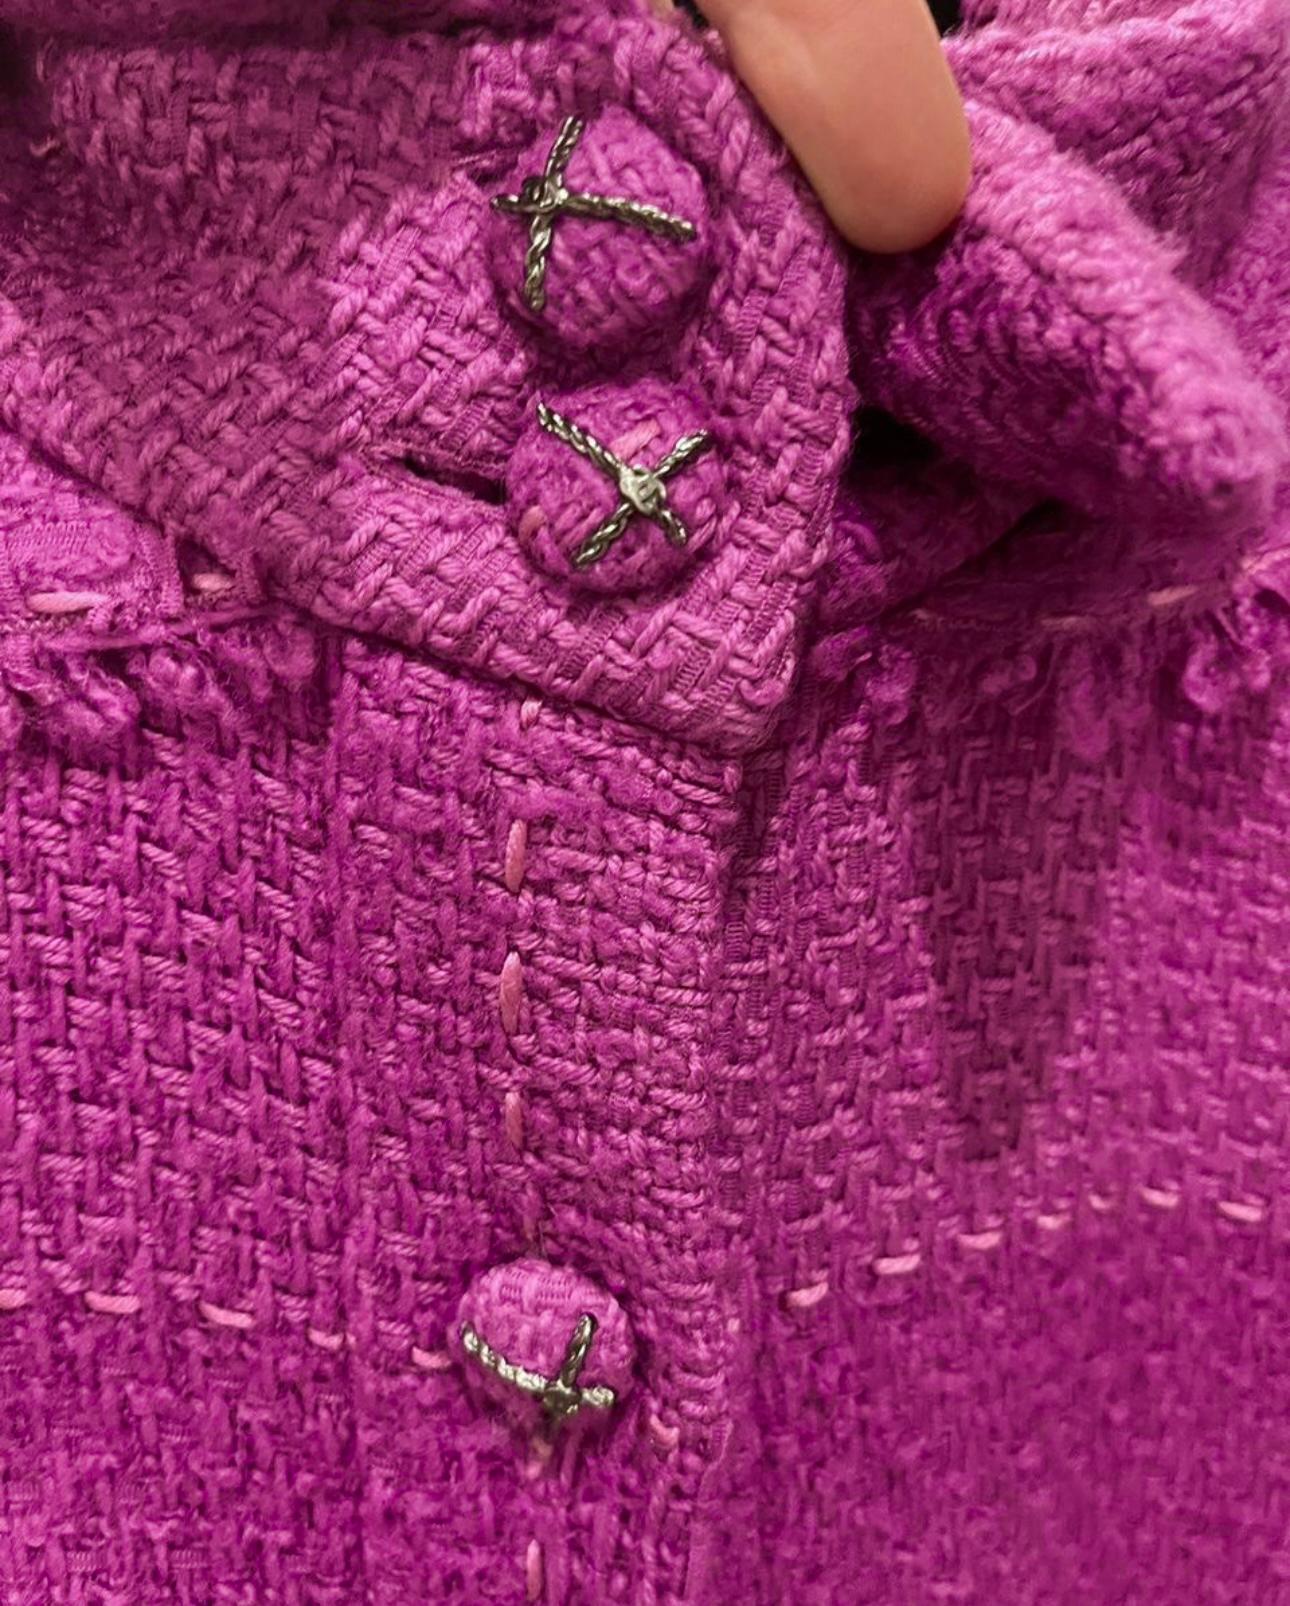 Bright Chanel fuchsia lesage tweed jacket / coat with CC logo tweed buttons from Paris / MONACO Collection, metiers d'Art
Size mark 34 FR. Condition is pristine.